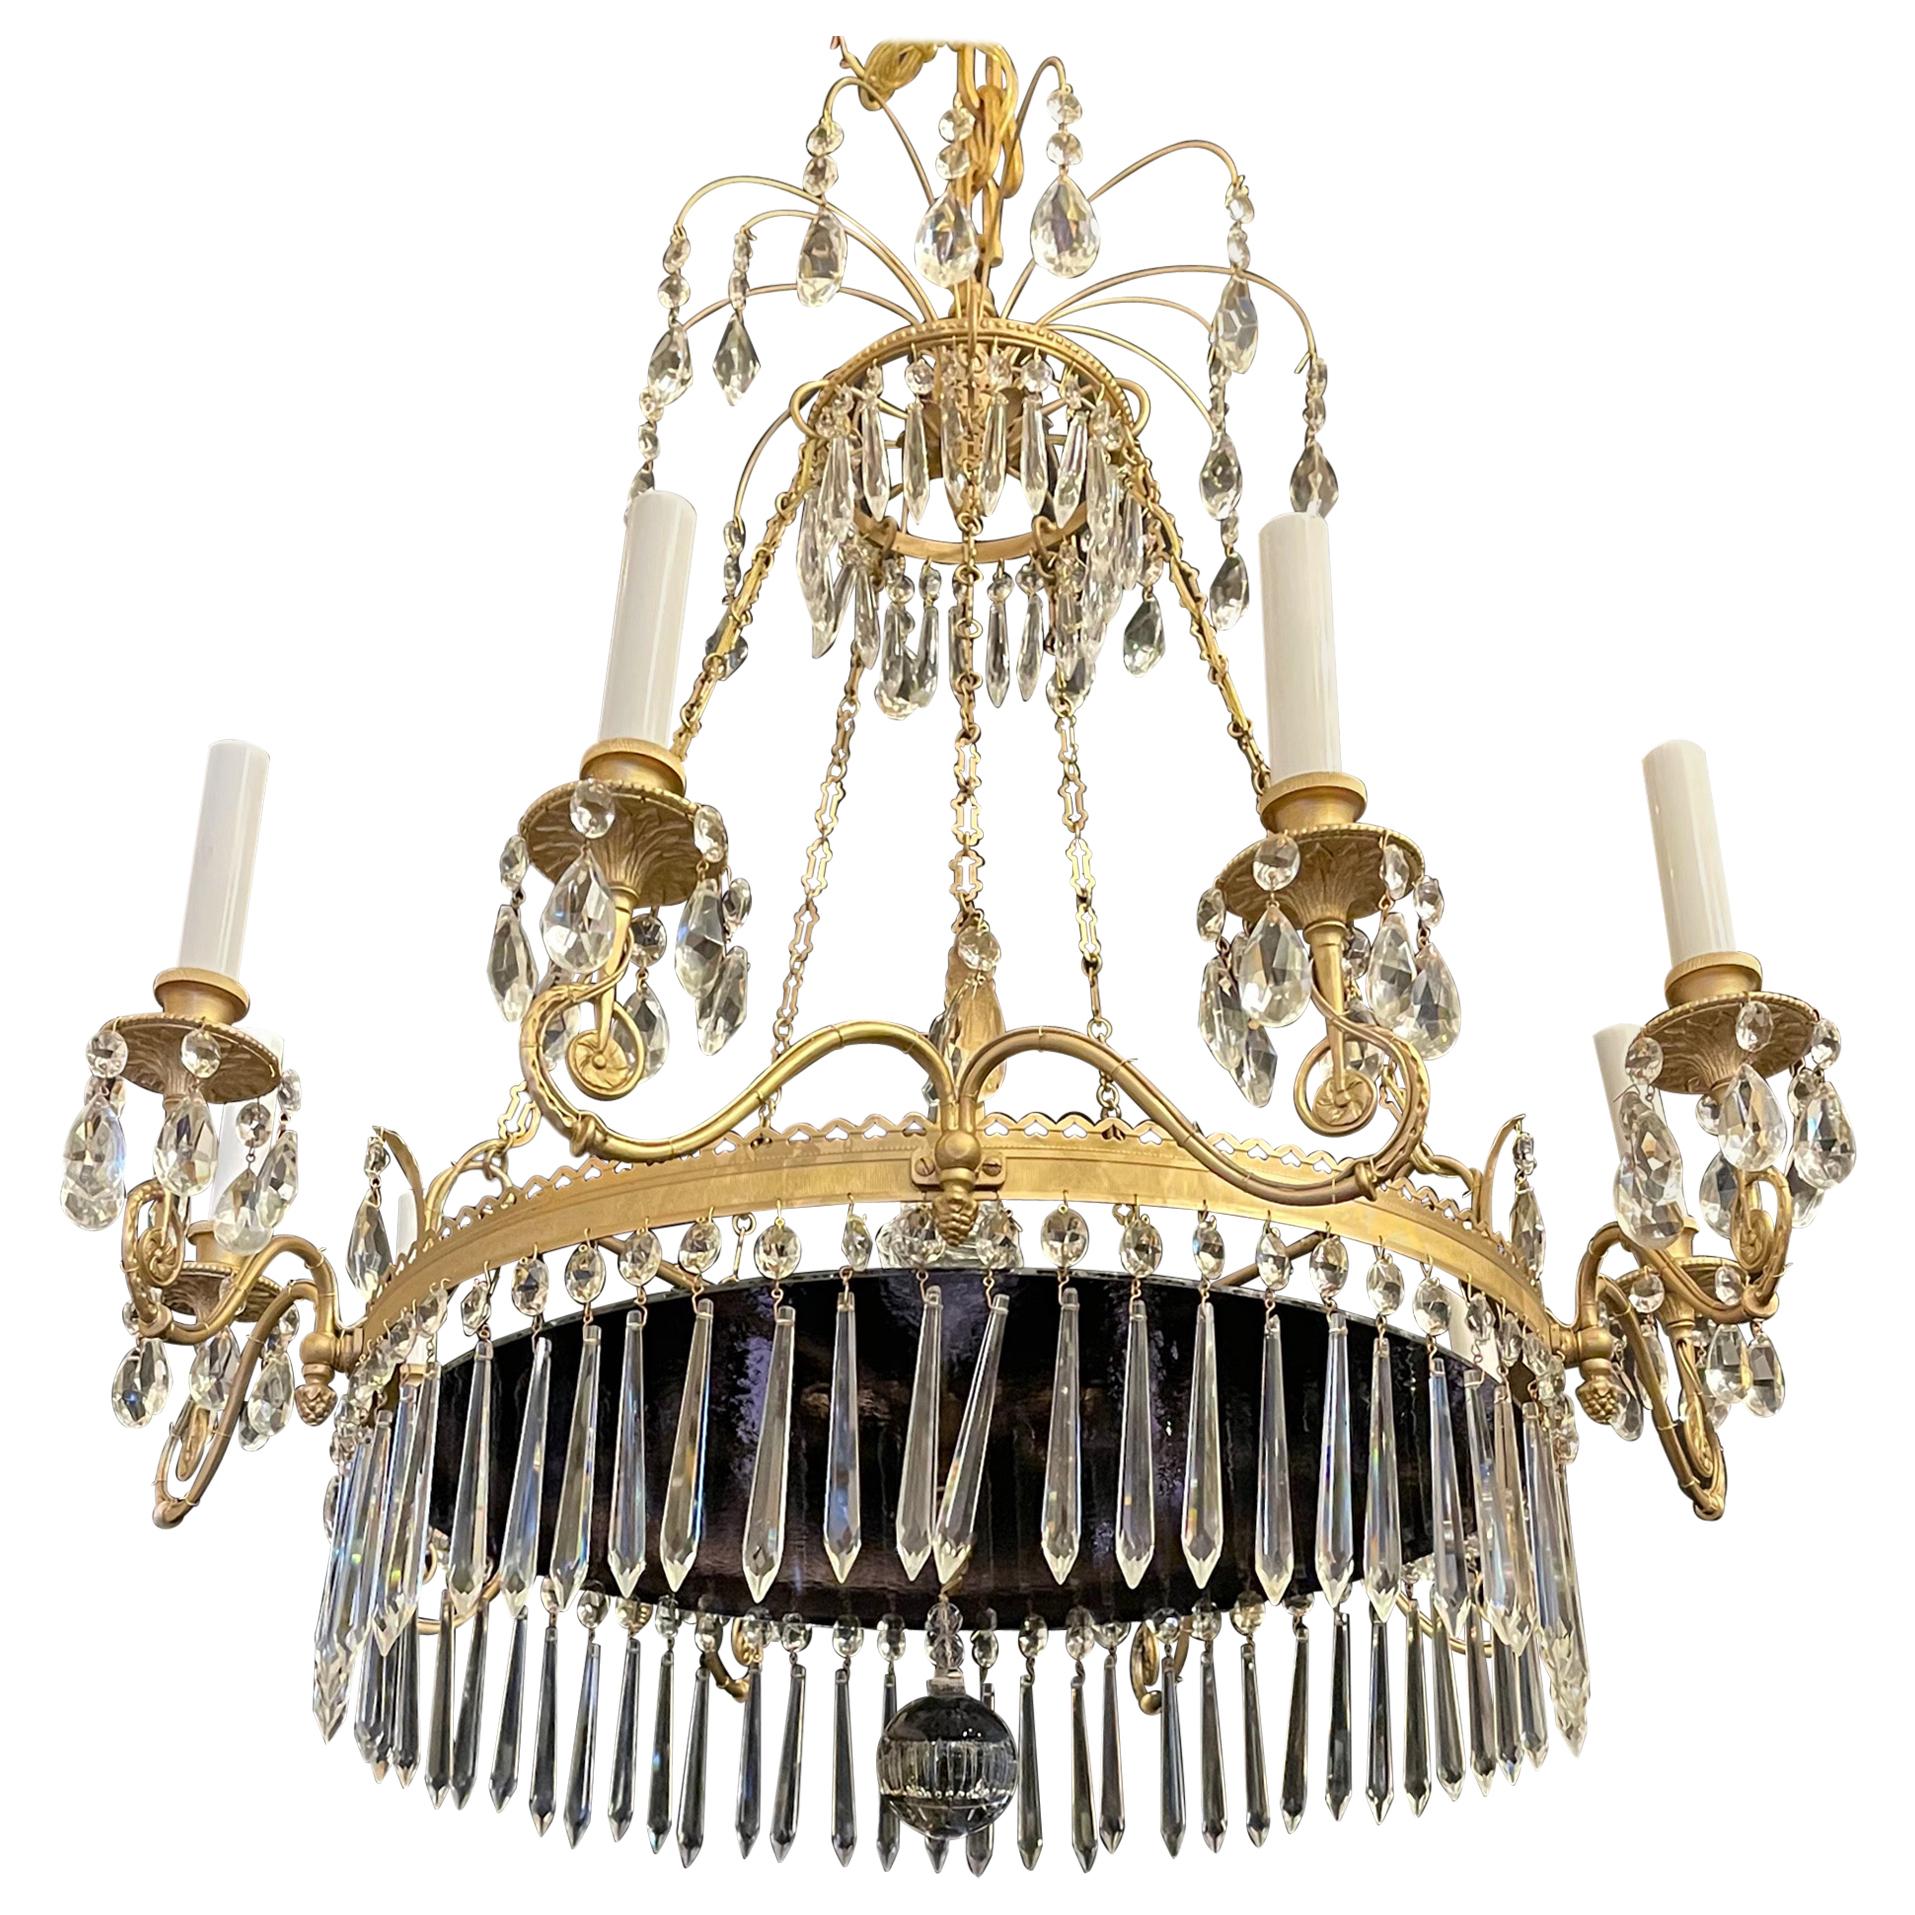 Wonderful French Empire Neoclassical Doré Bronze Purple Glass Crystal Chandelier